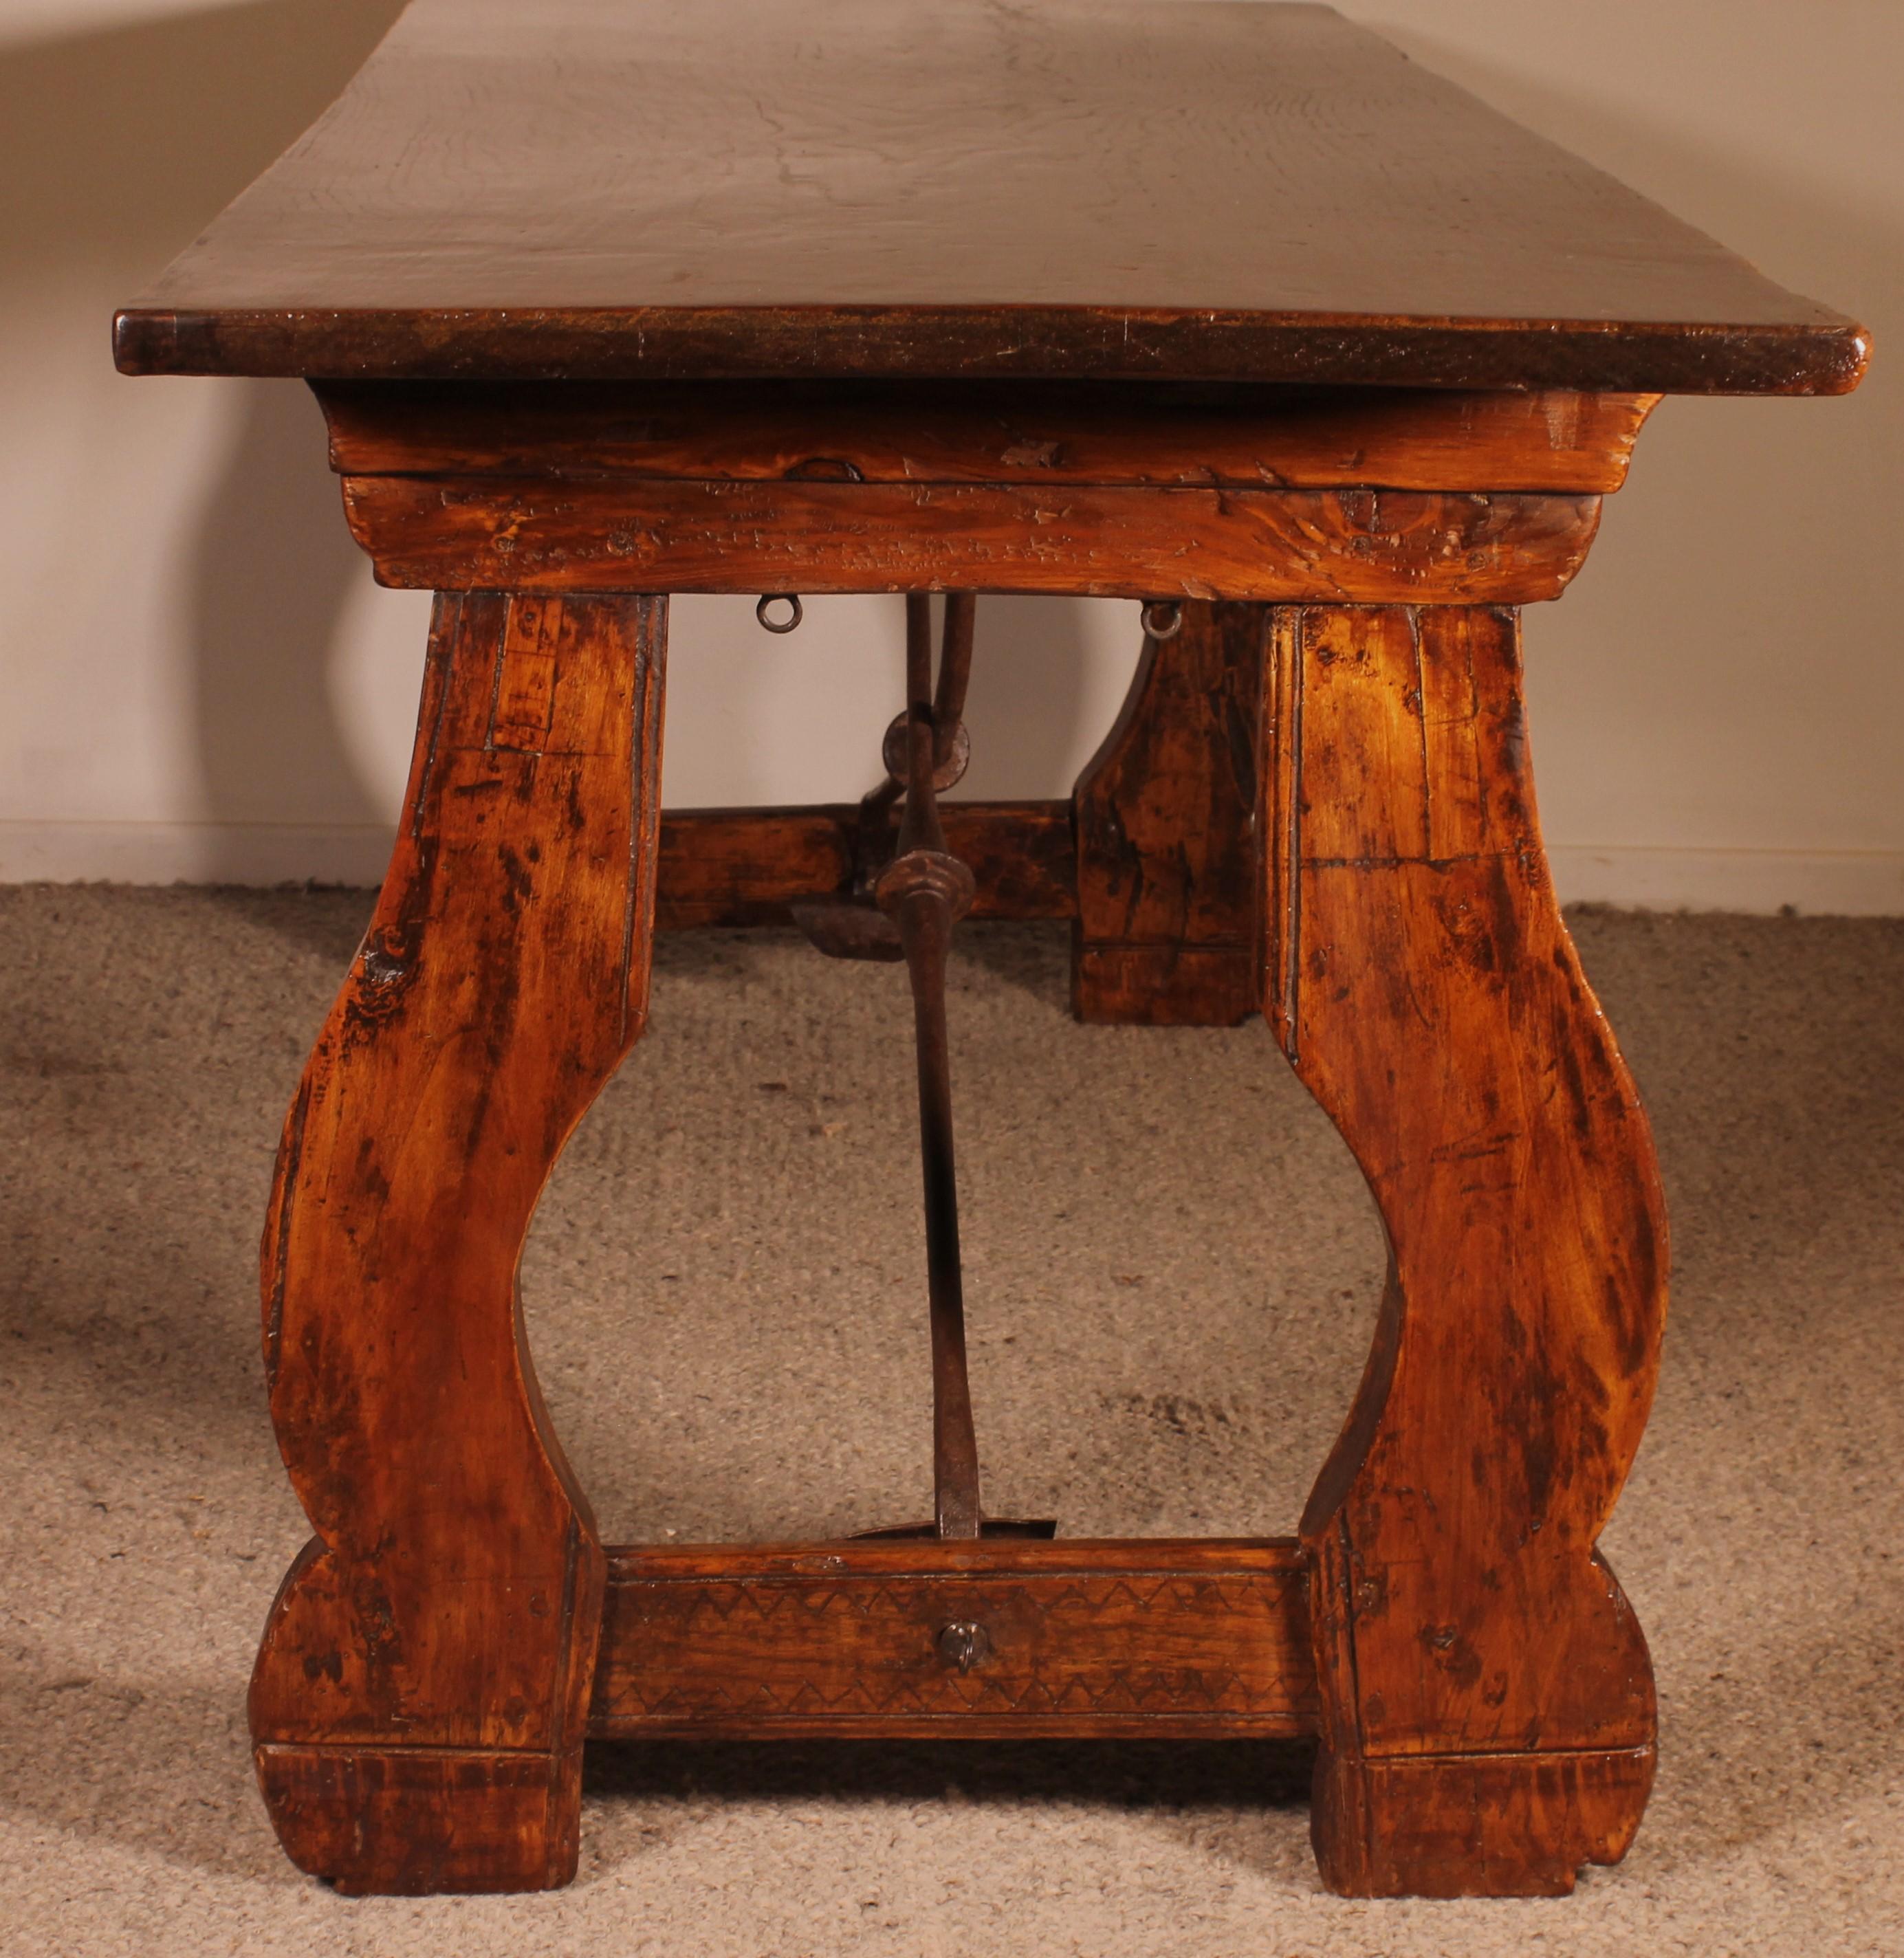 Chestnut Spanish Table From The 17th Century